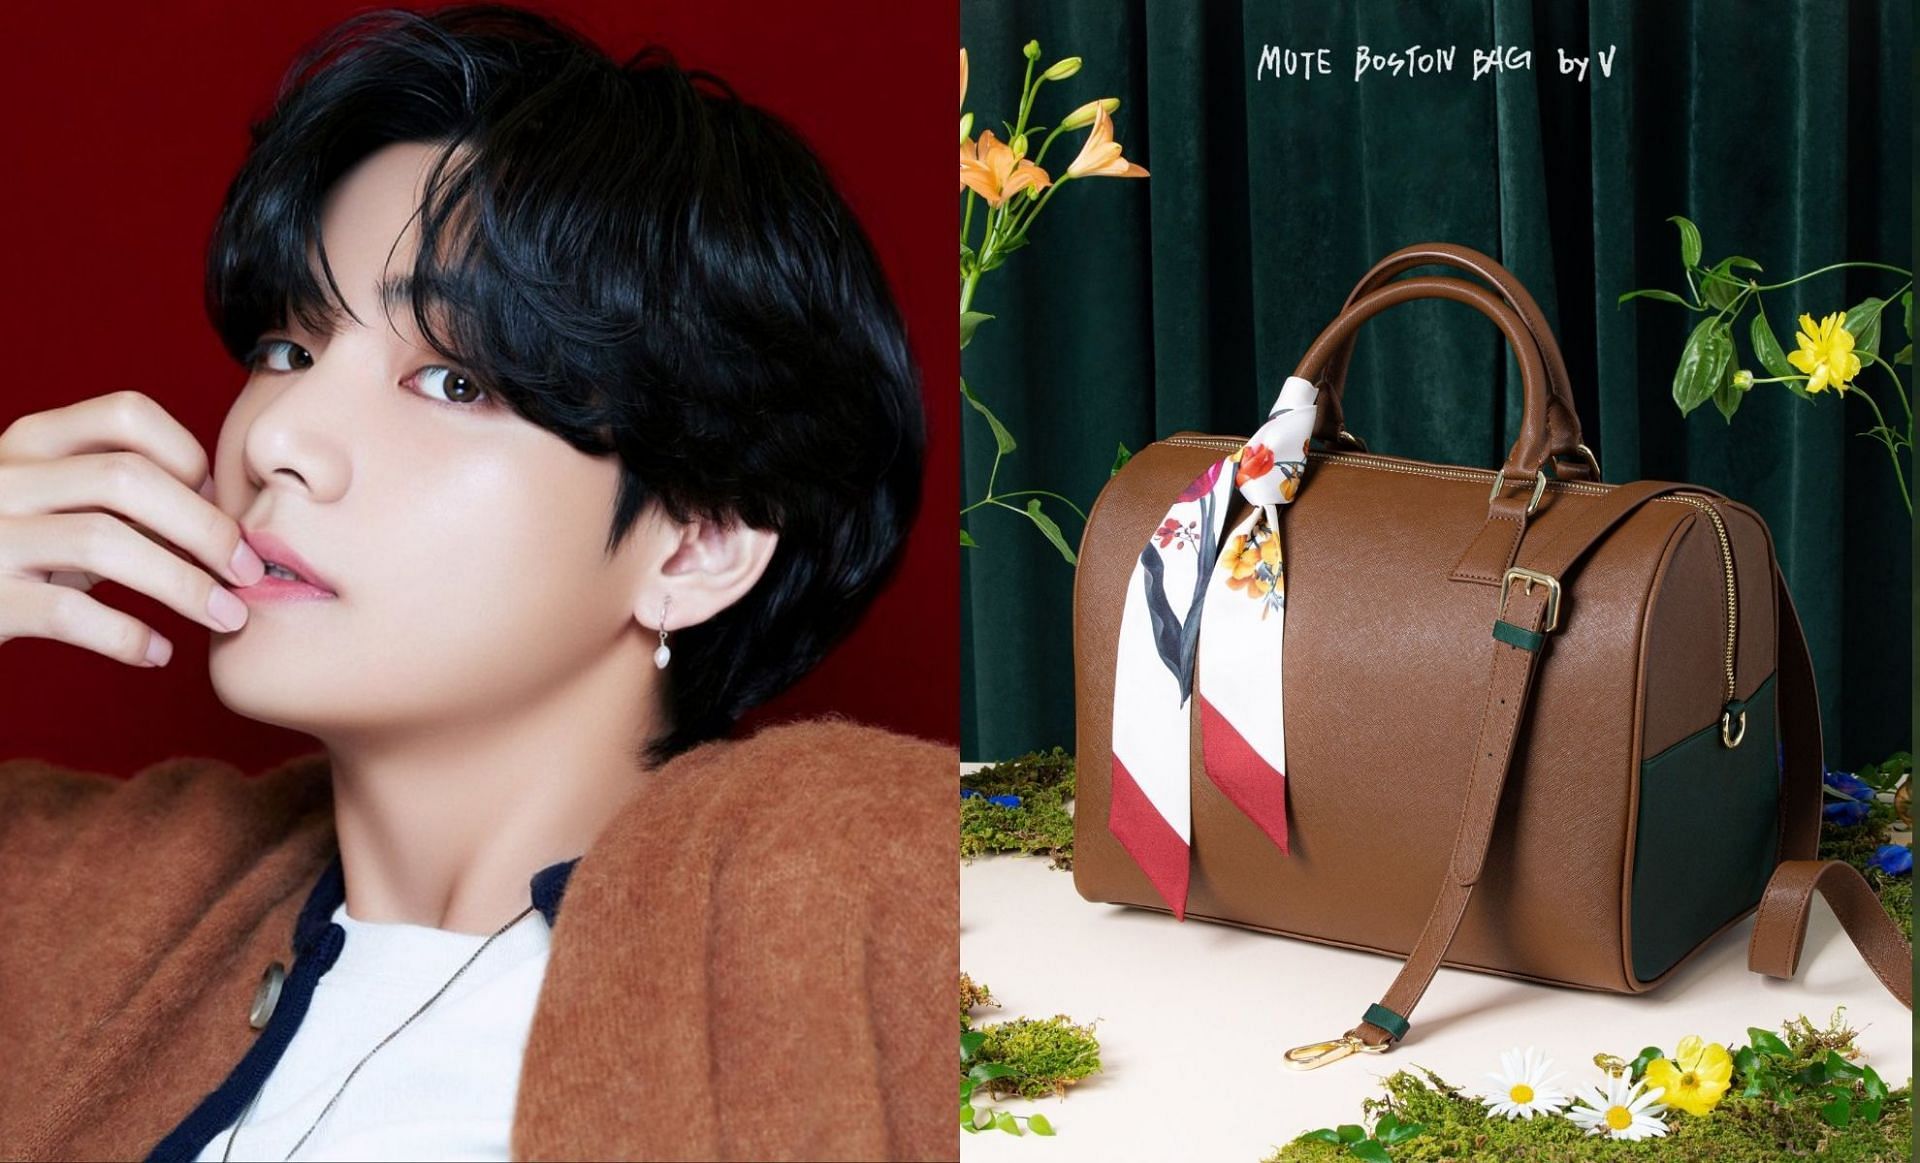 BTS V's Mute Boston Bag: Sells out in a minute, ARMYs furious with